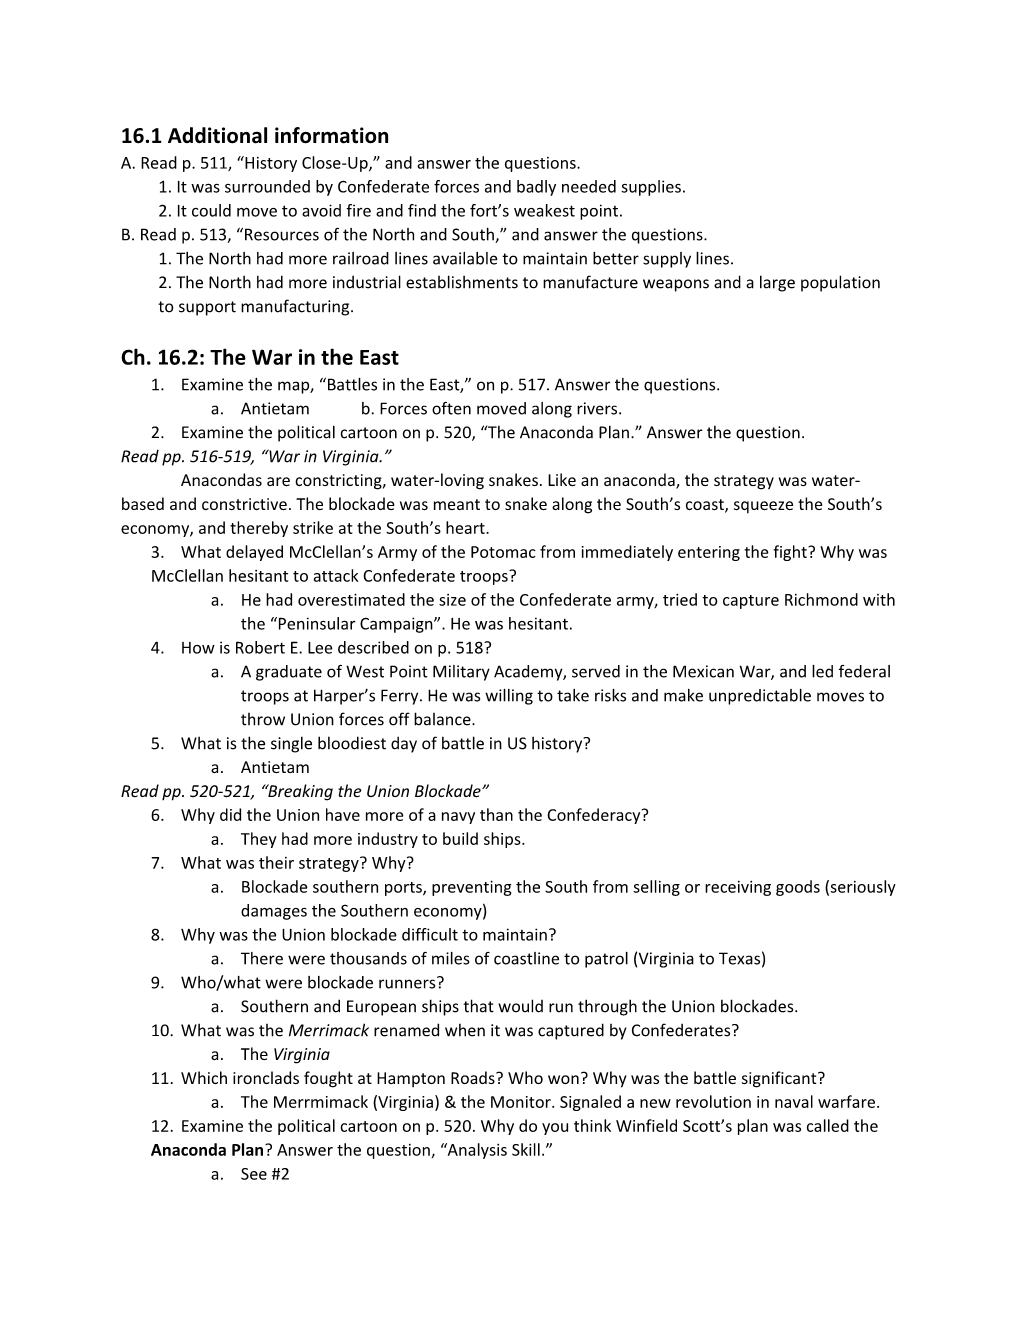 A. Read P. 511, History Close-Up, and Answer the Questions